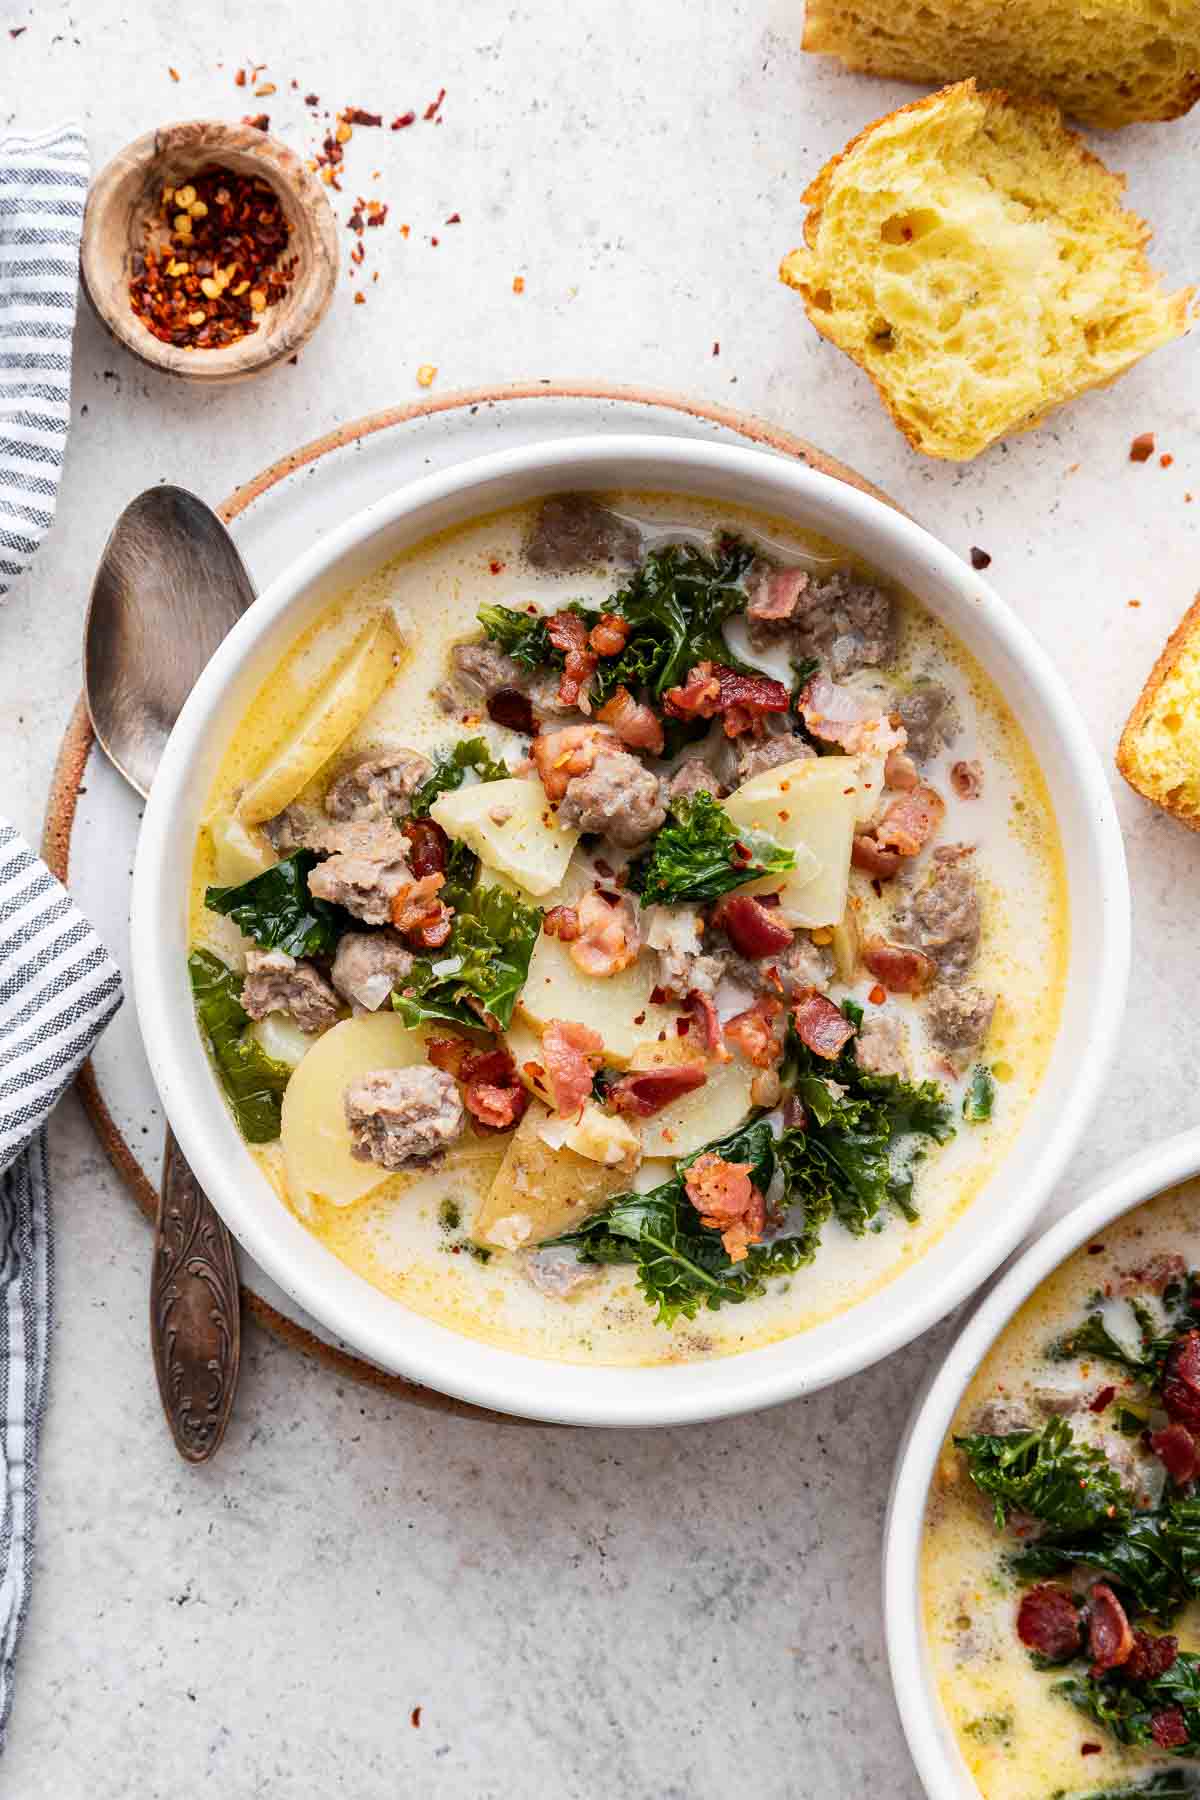 Overhead image of two bowls of chunky white sauce with kale, bacon, and potatoes.